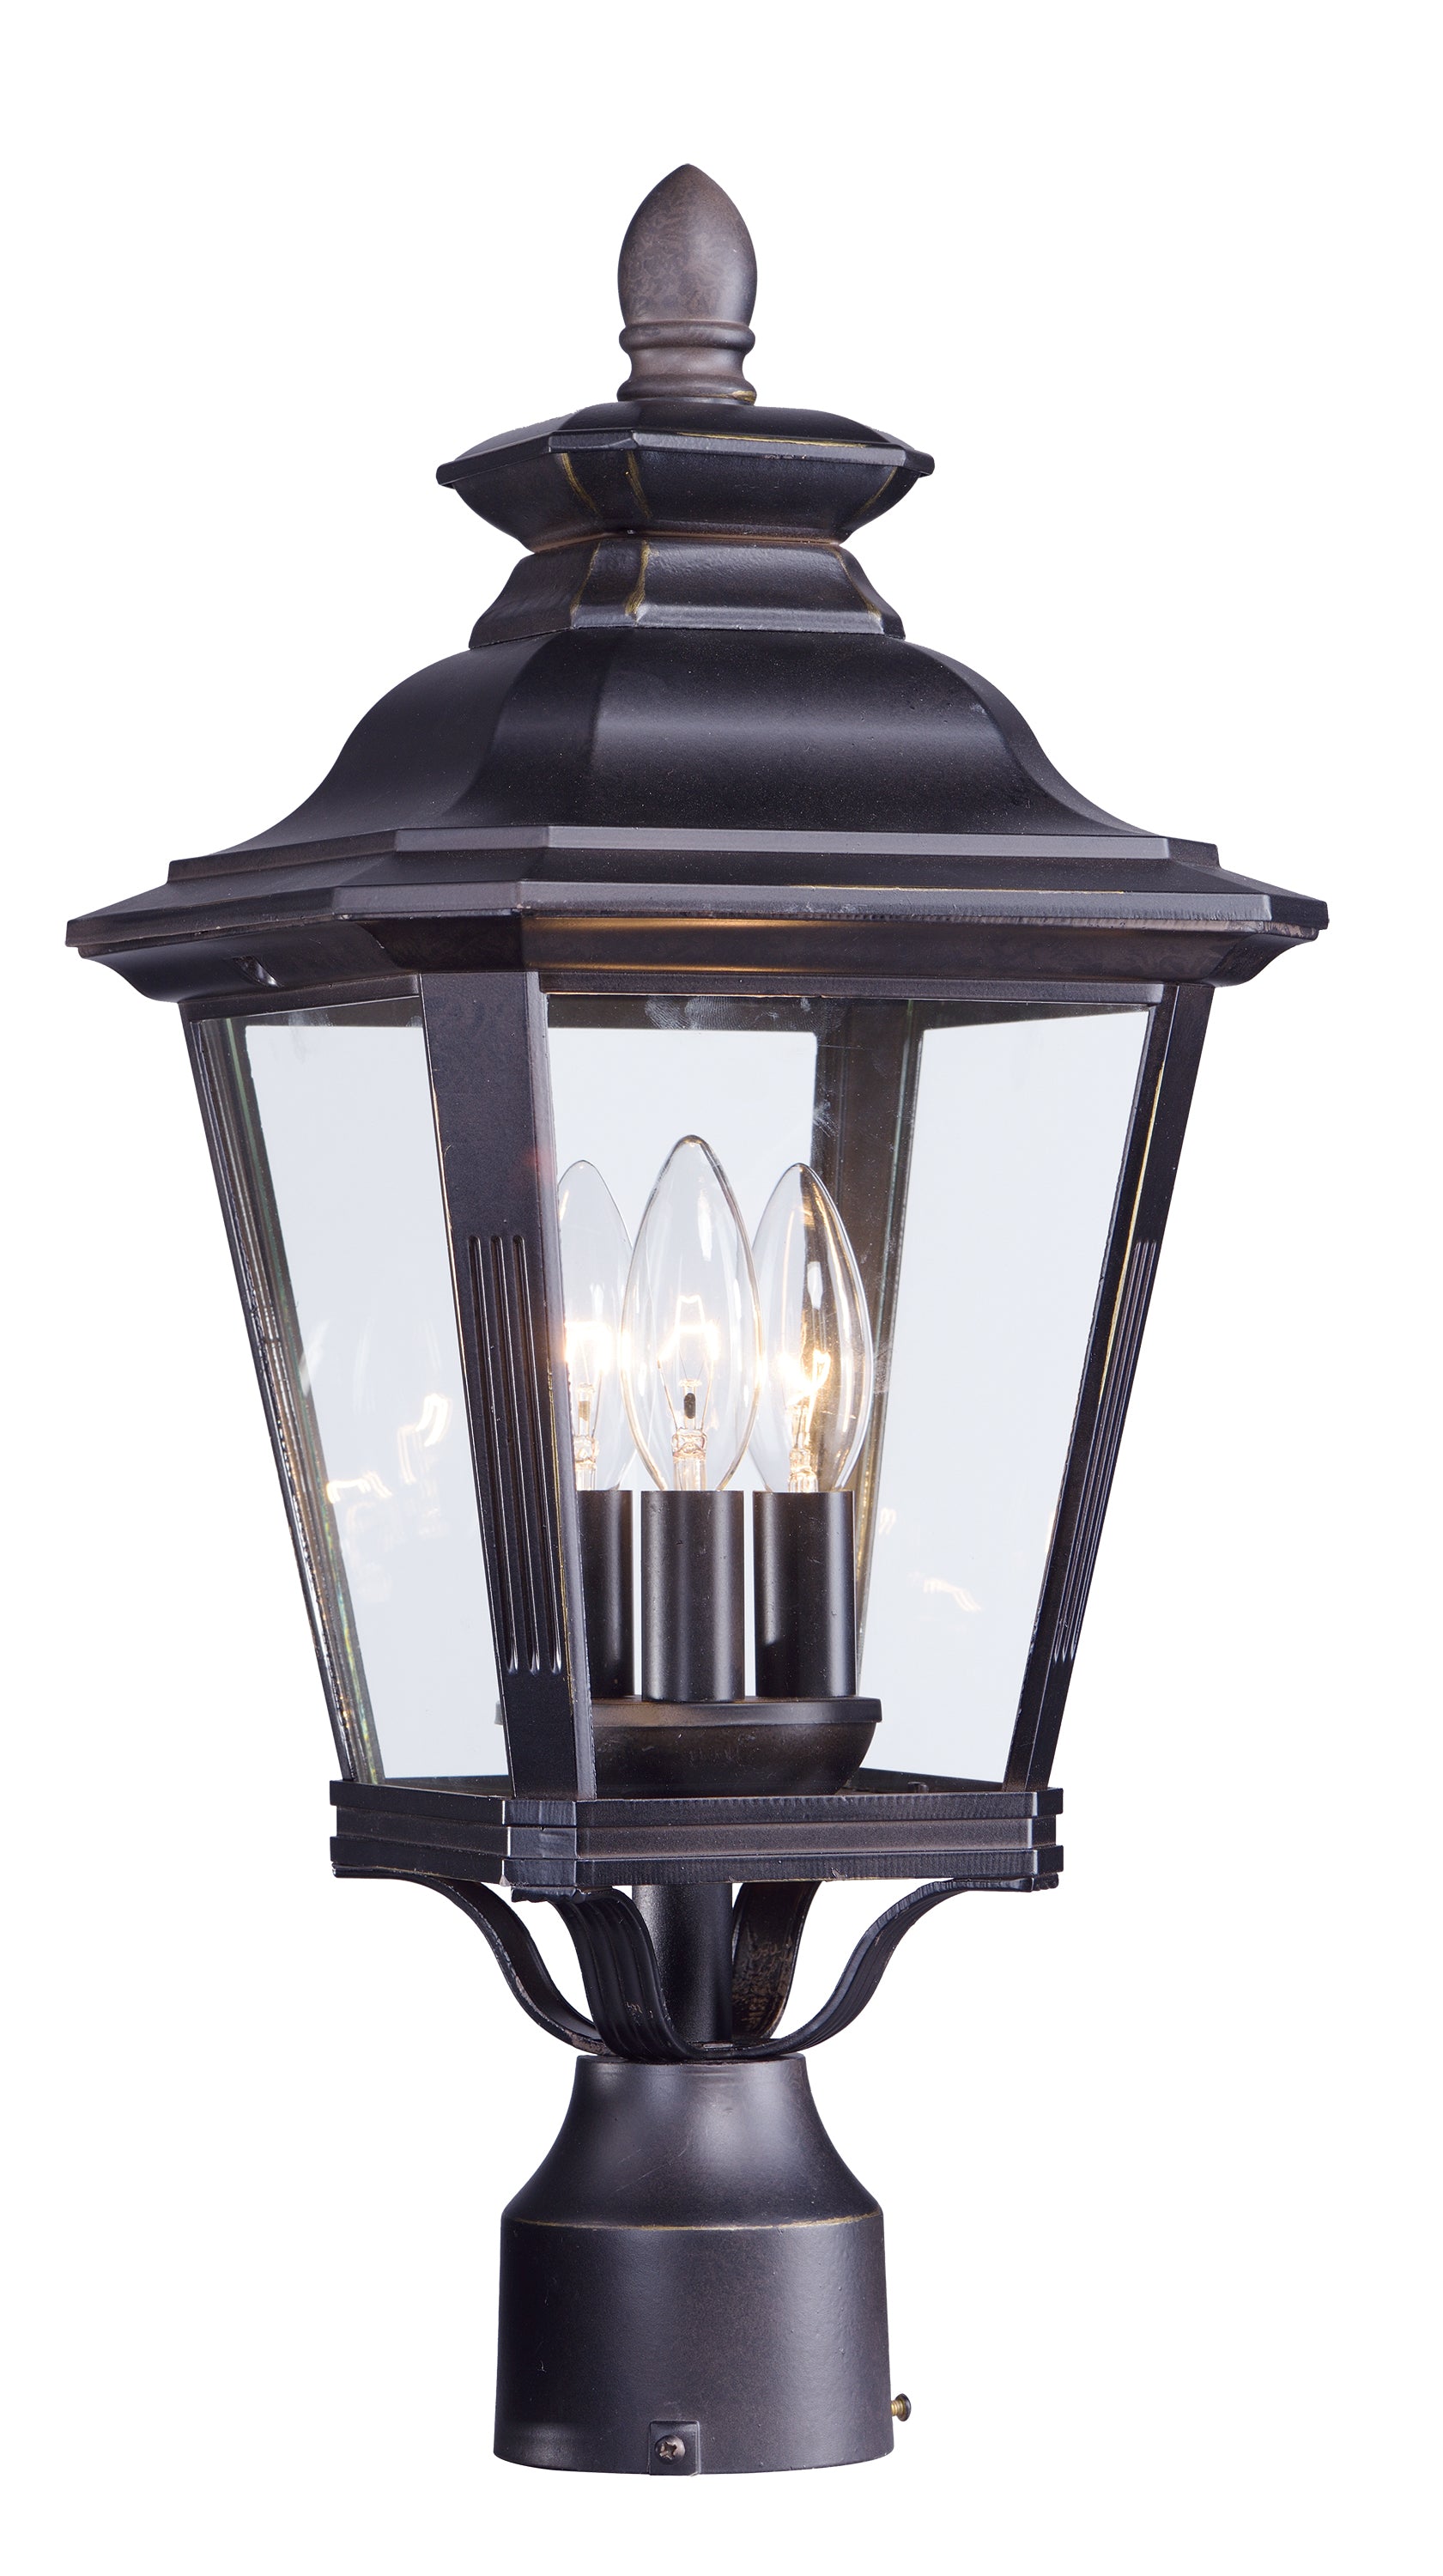 Maxim Knoxville 3-Light Outdoor Post